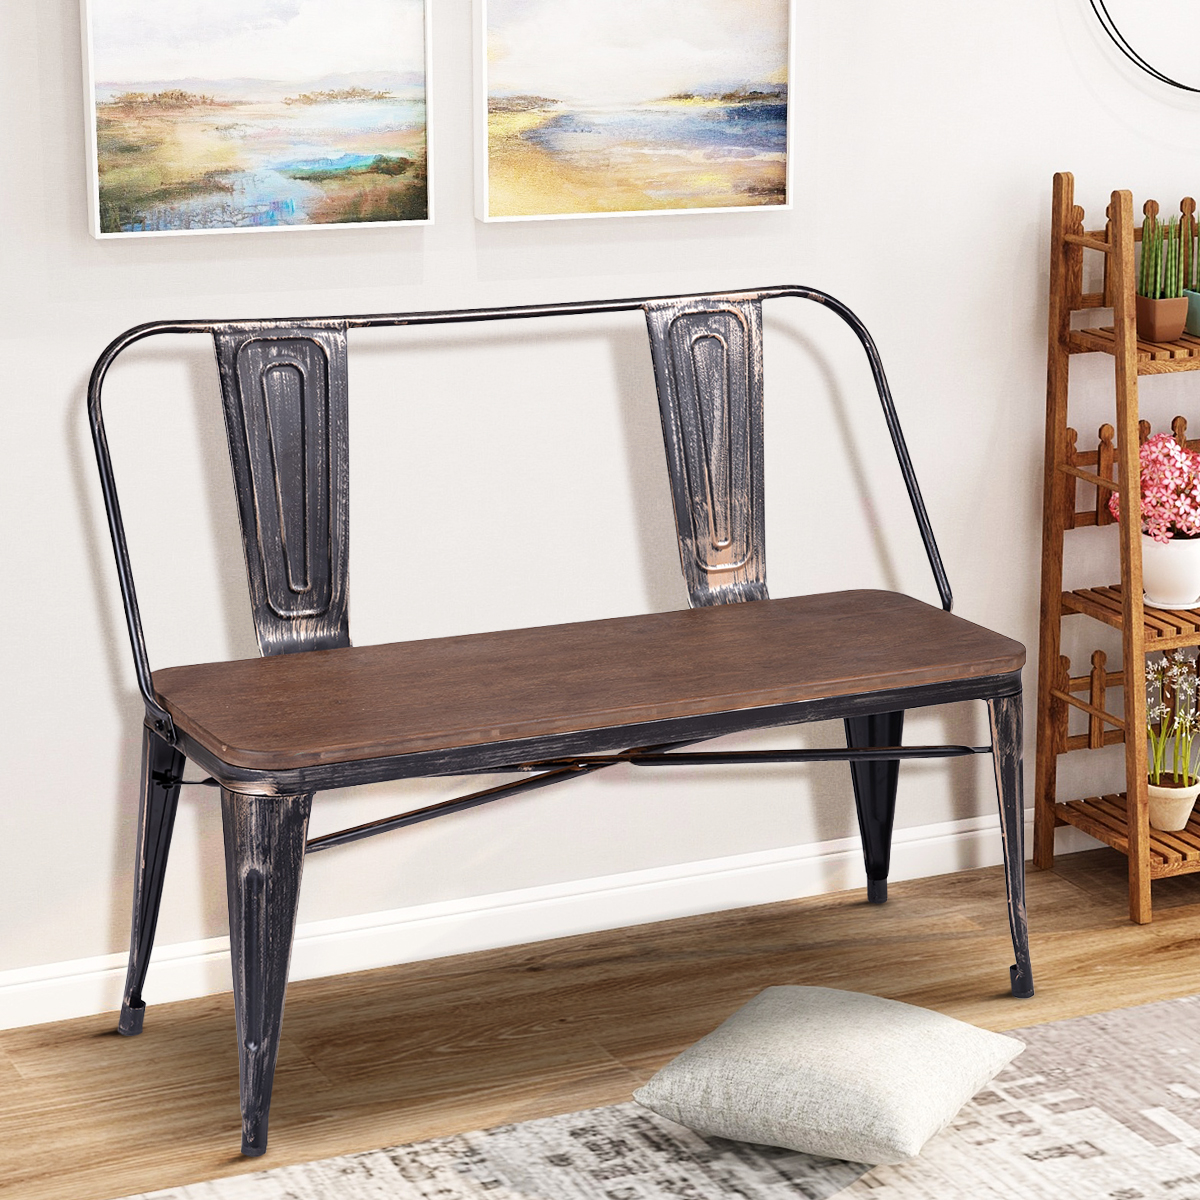 Rustic Vintage Style Dining Table, Bench, Dining Room Furniture